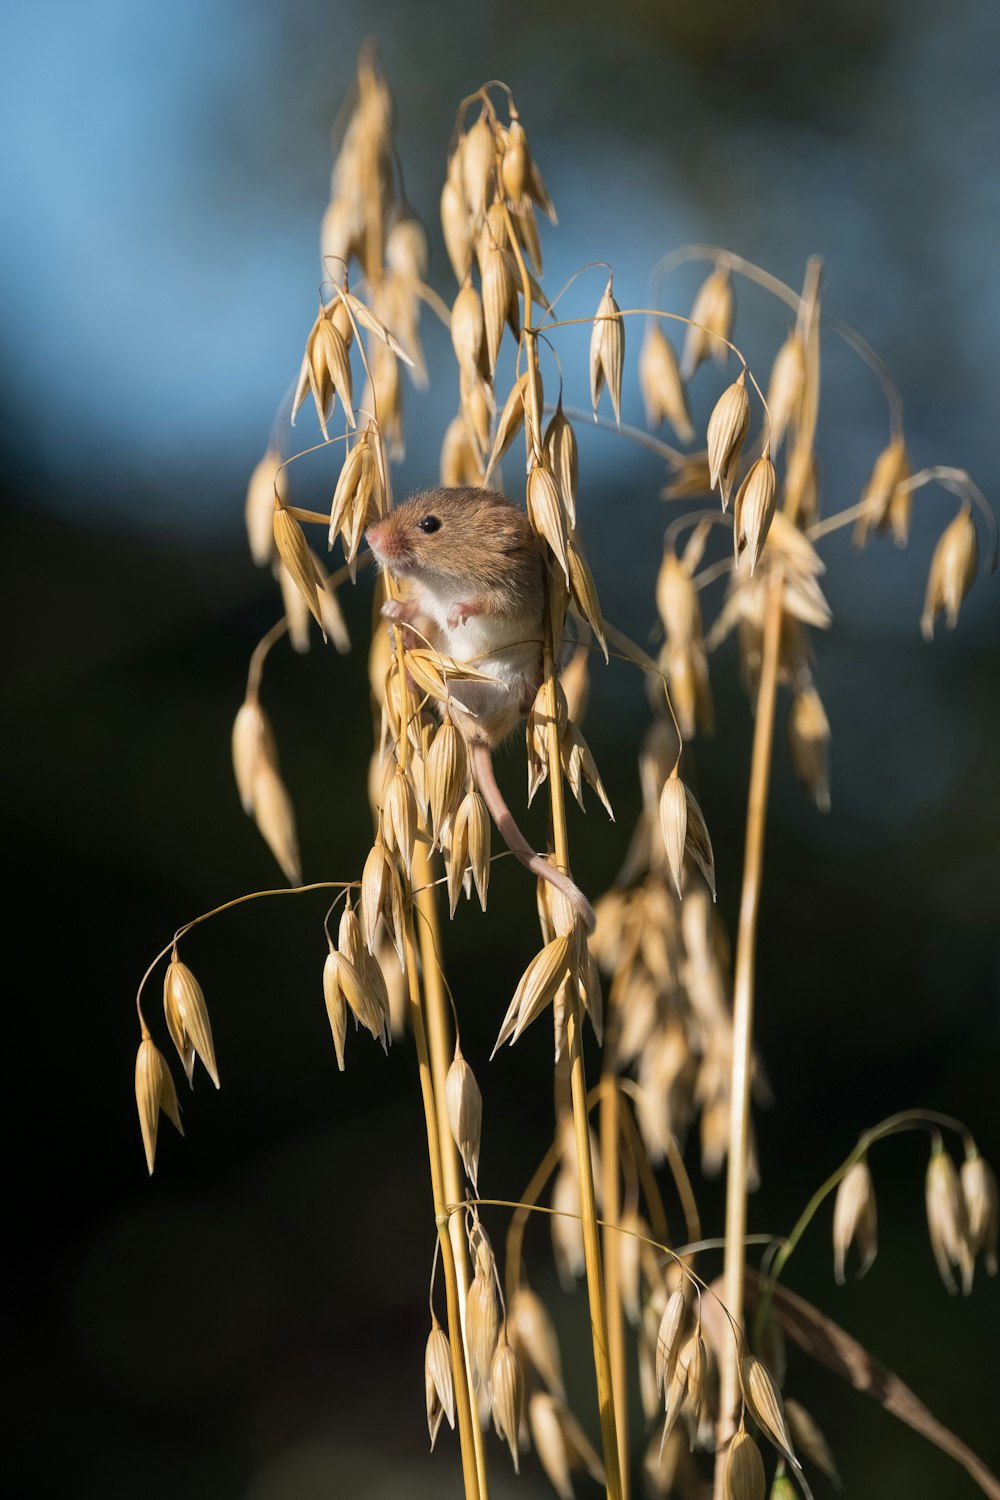 a small animal in a field of wheat